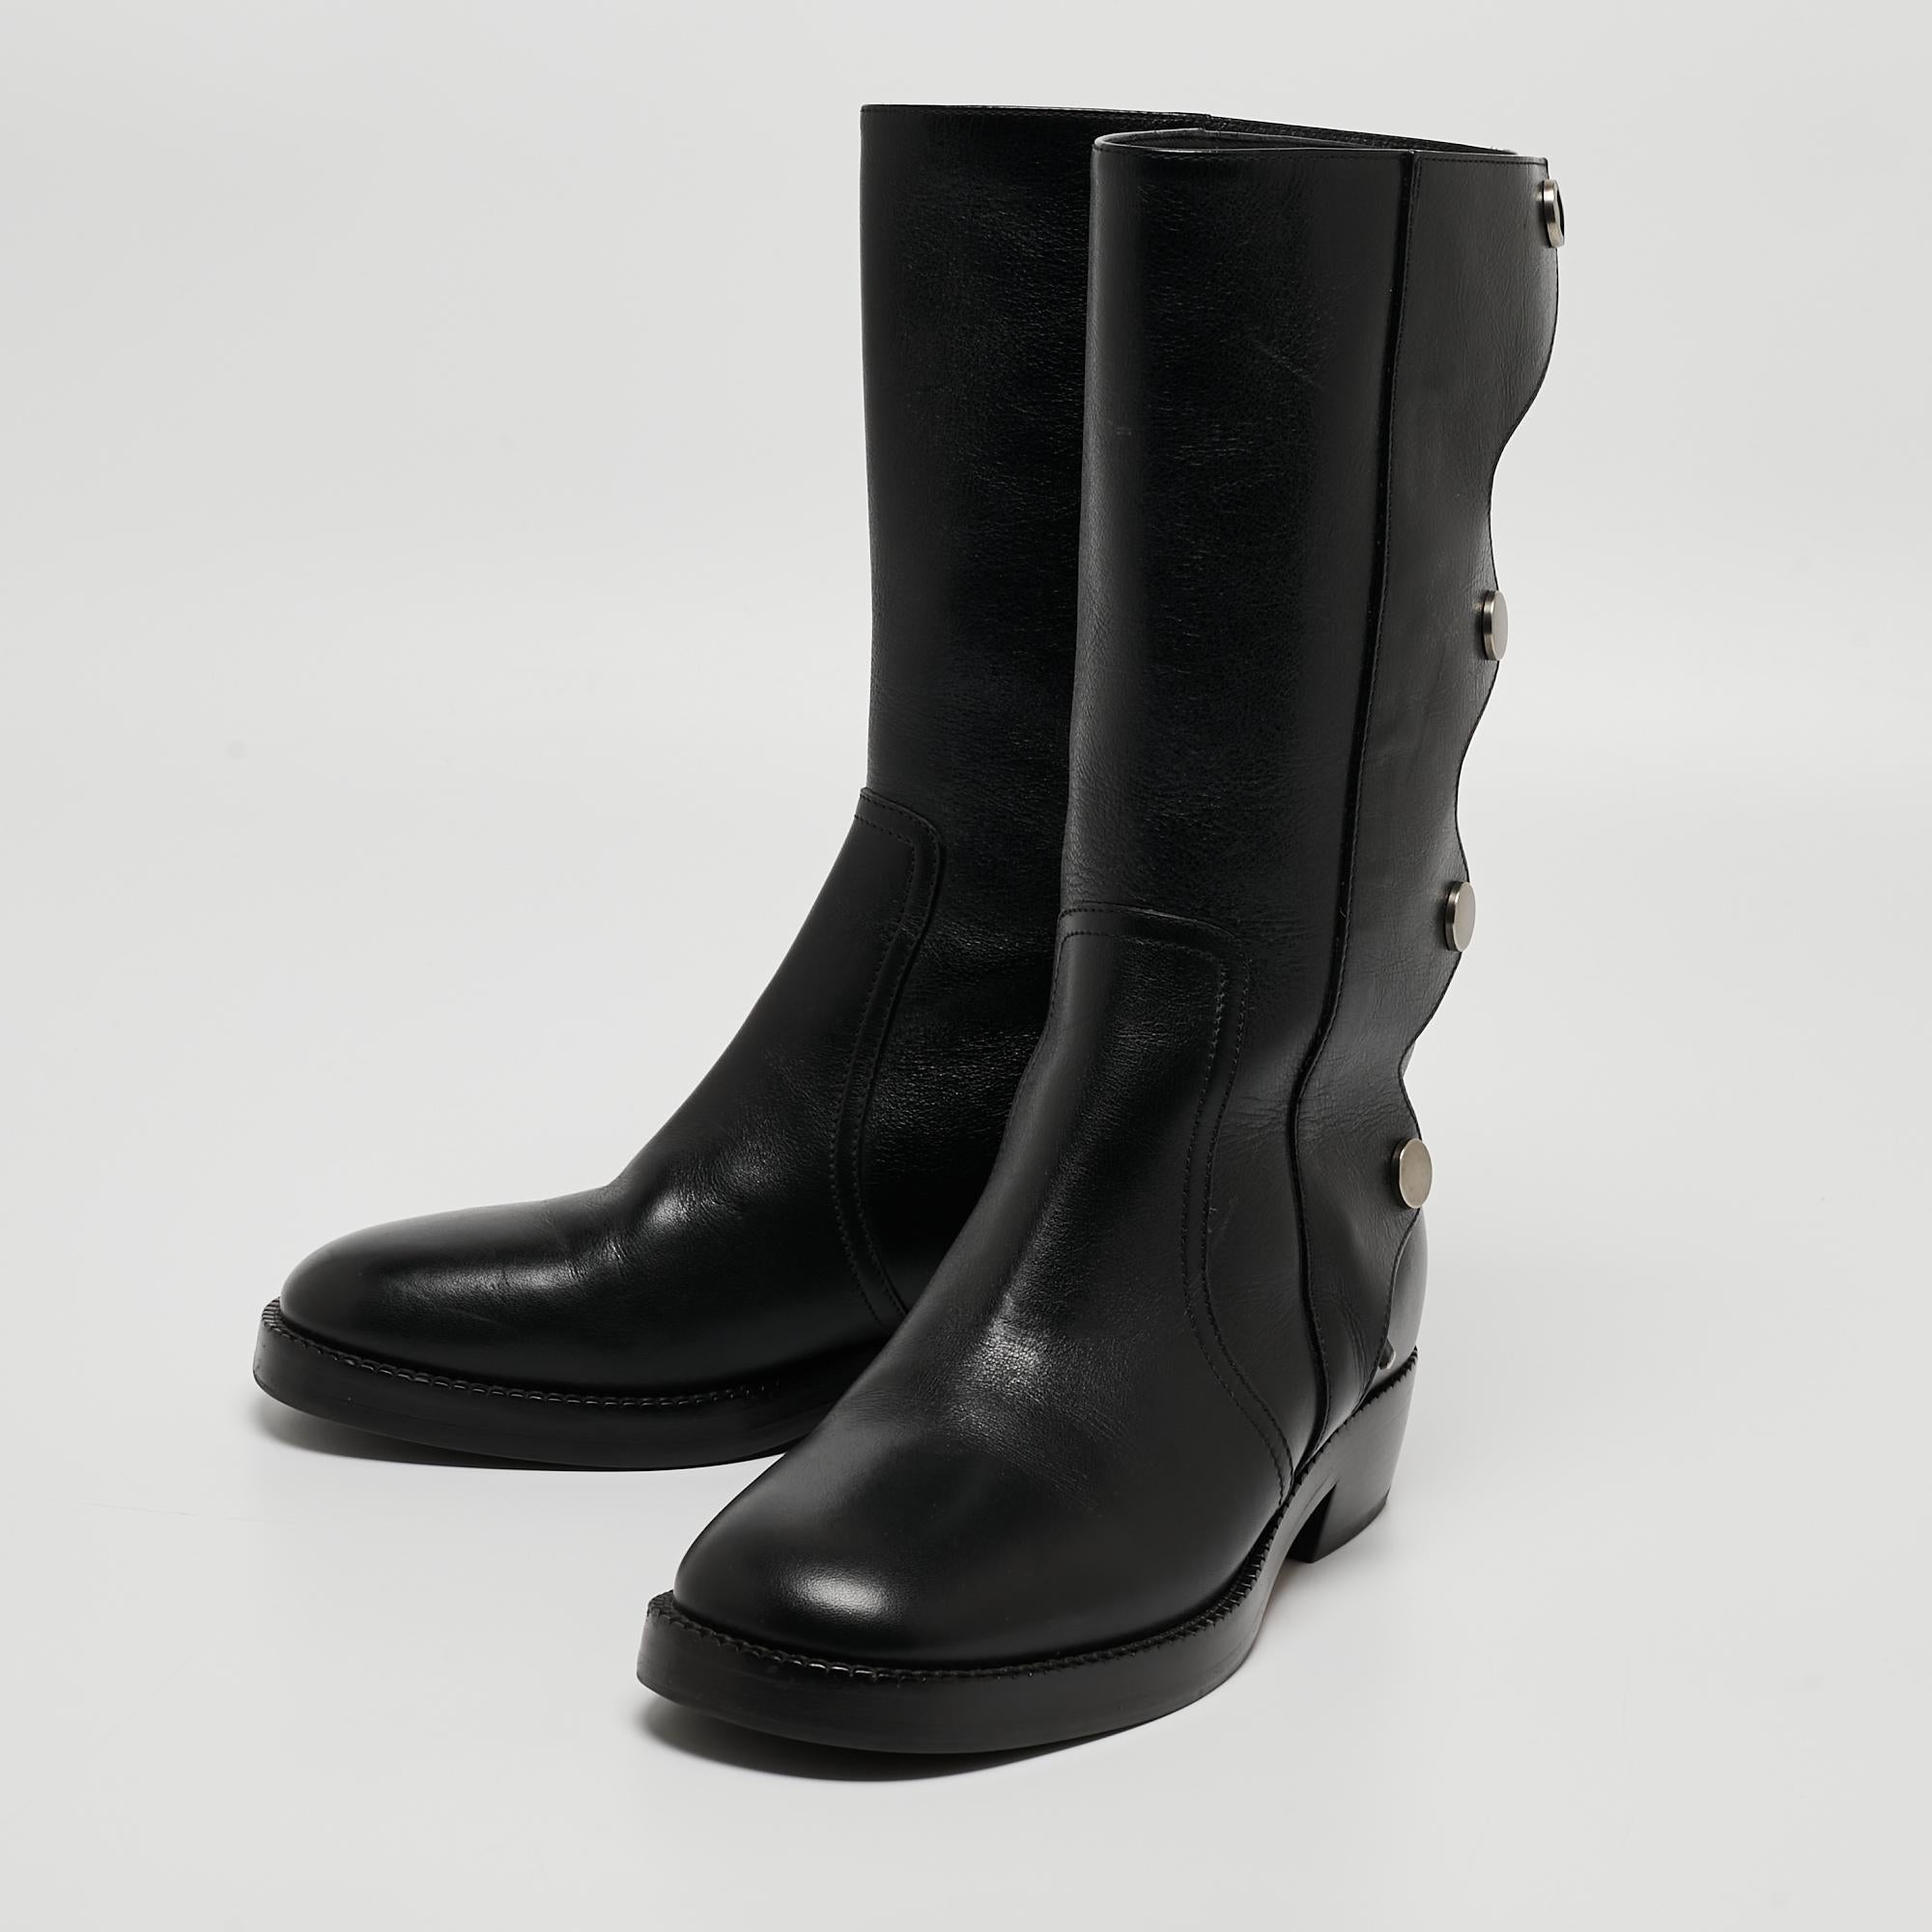 Dior Black Leather Moto Boots Size 36 For Sale 1